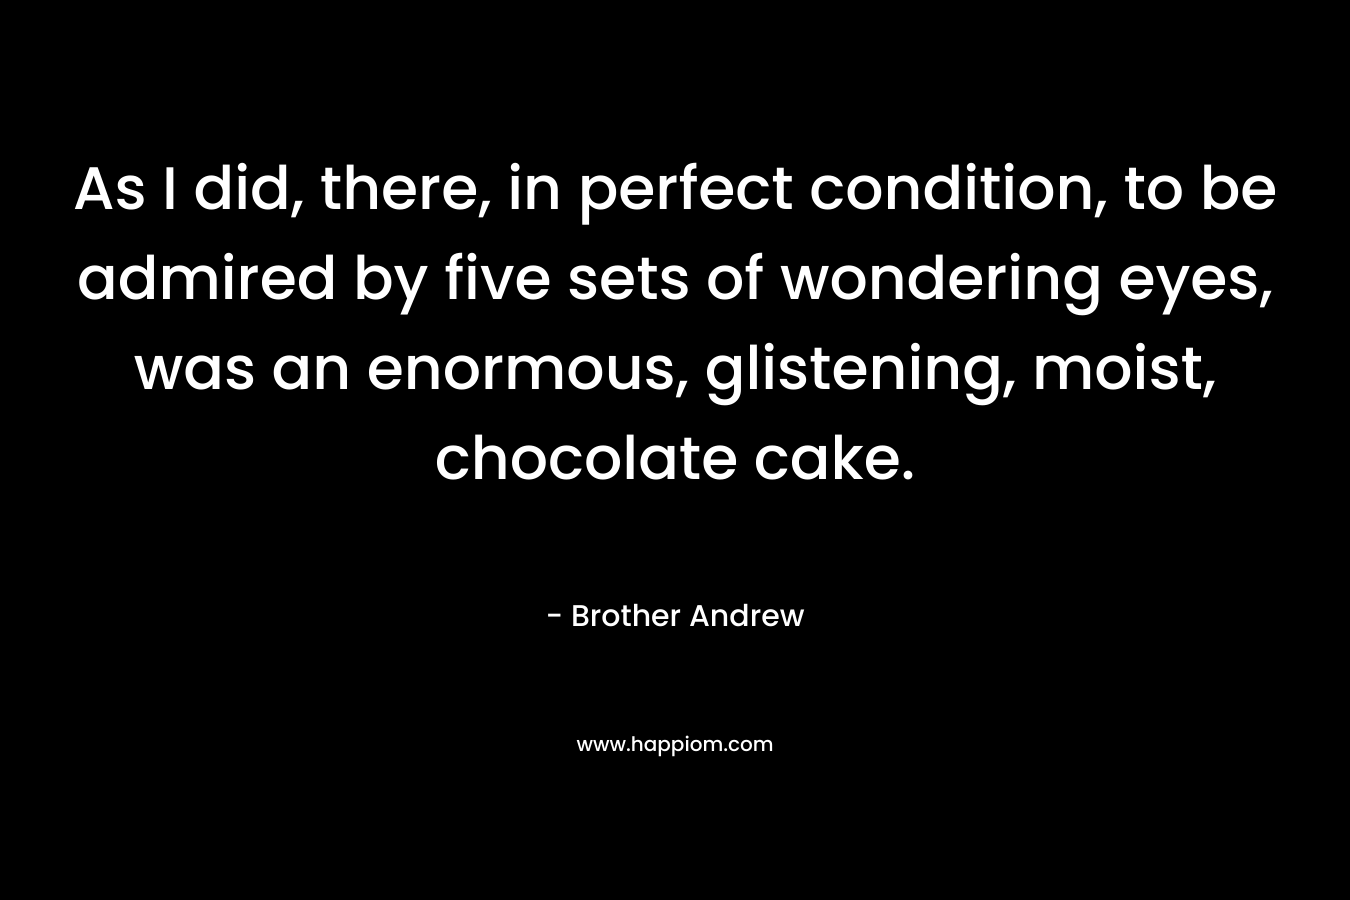 As I did, there, in perfect condition, to be admired by five sets of wondering eyes, was an enormous, glistening, moist, chocolate cake. – Brother Andrew